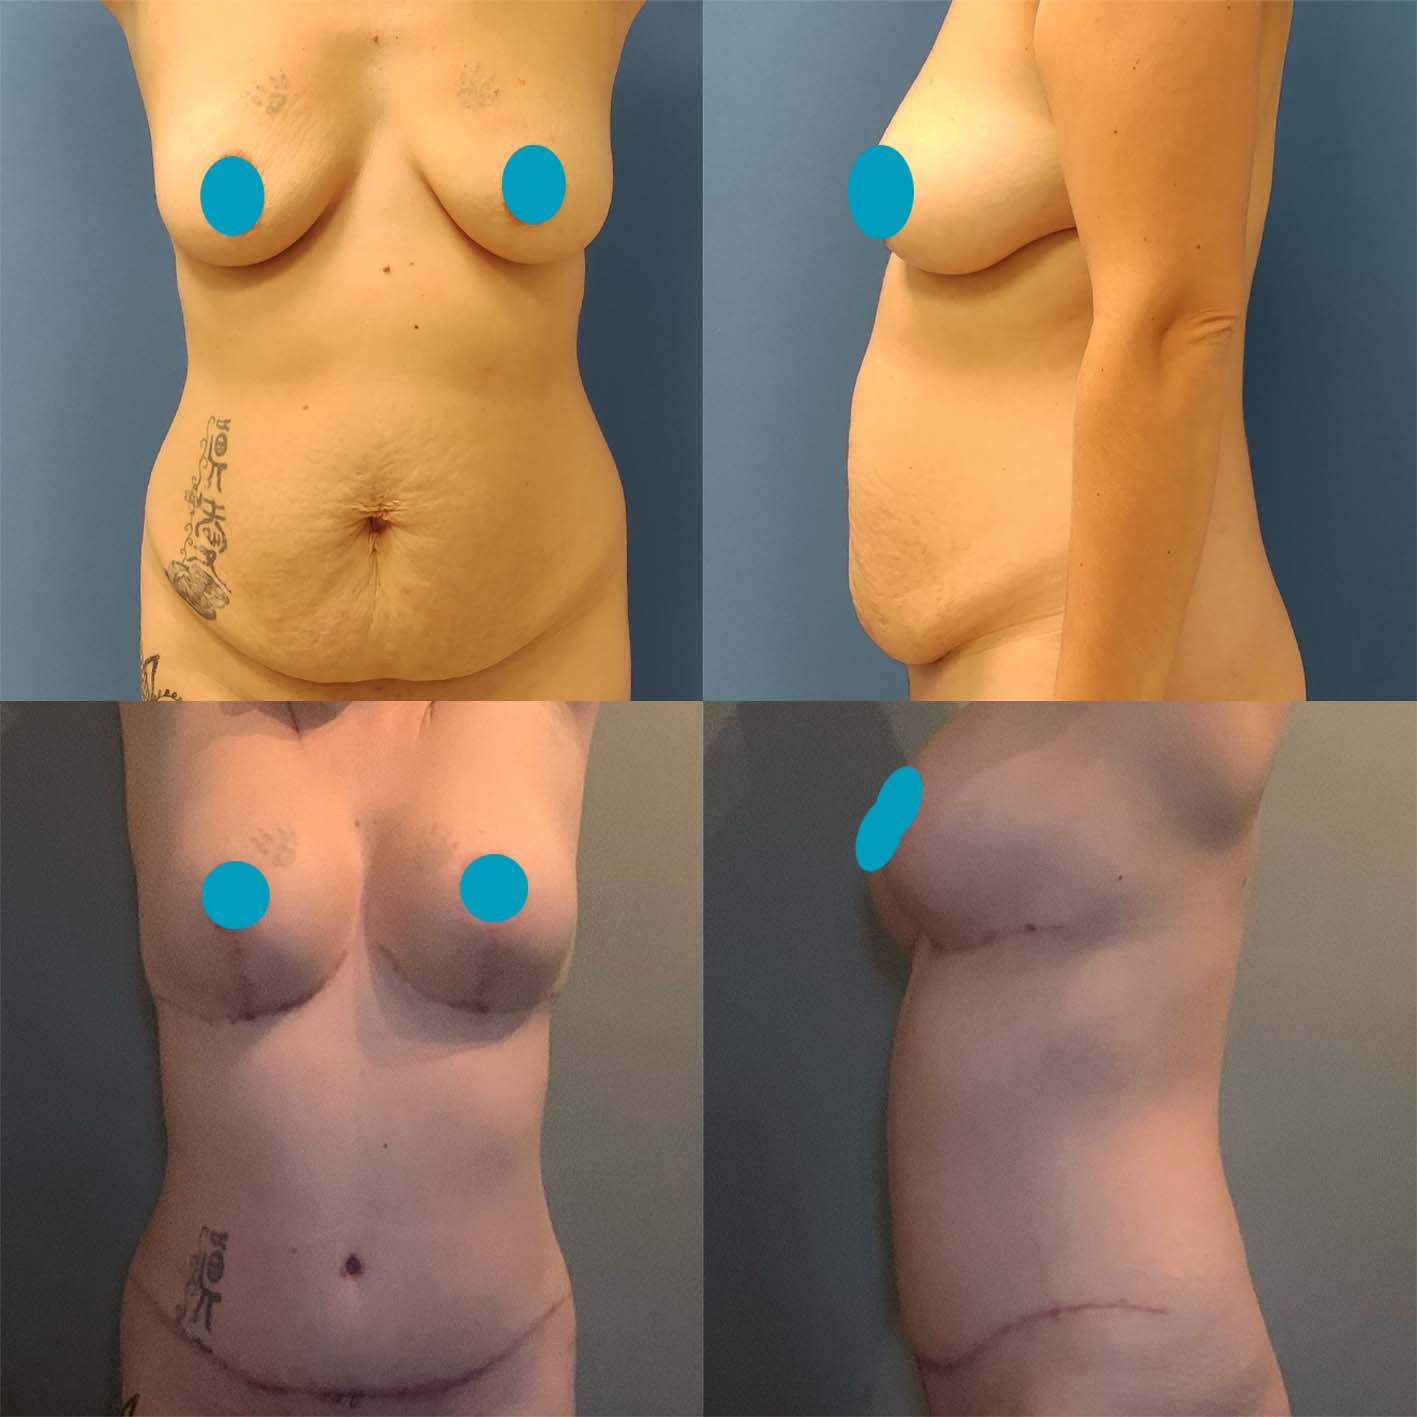 Nordesthetics clinic - The timeline for tummy tuck recovery varies